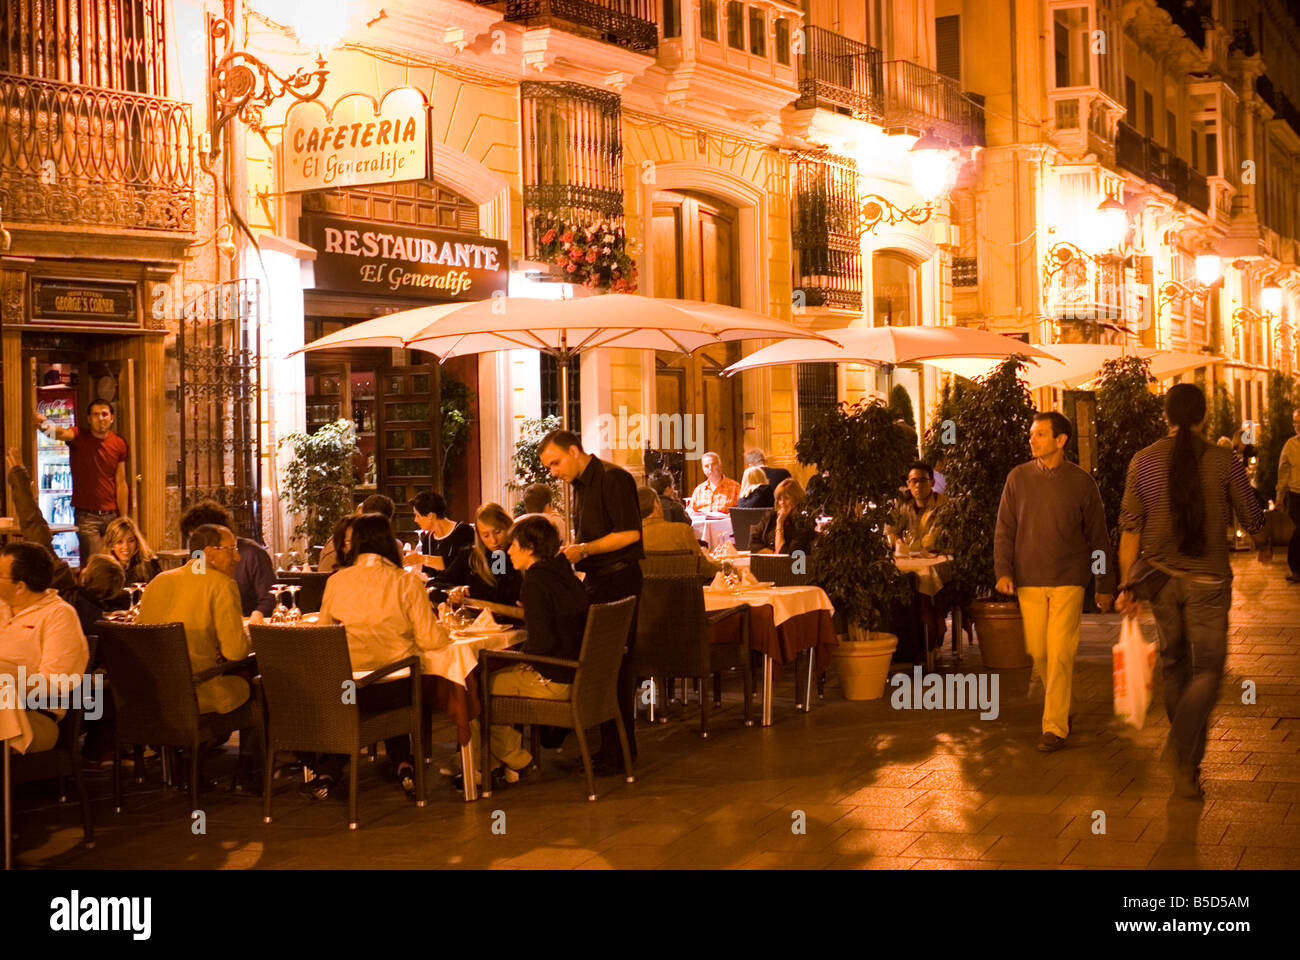 People sitting outside cafe restaurant El Generalife on Calle Caballeros in the historic El Carmen city centre of Valencia Spain Stock Photo